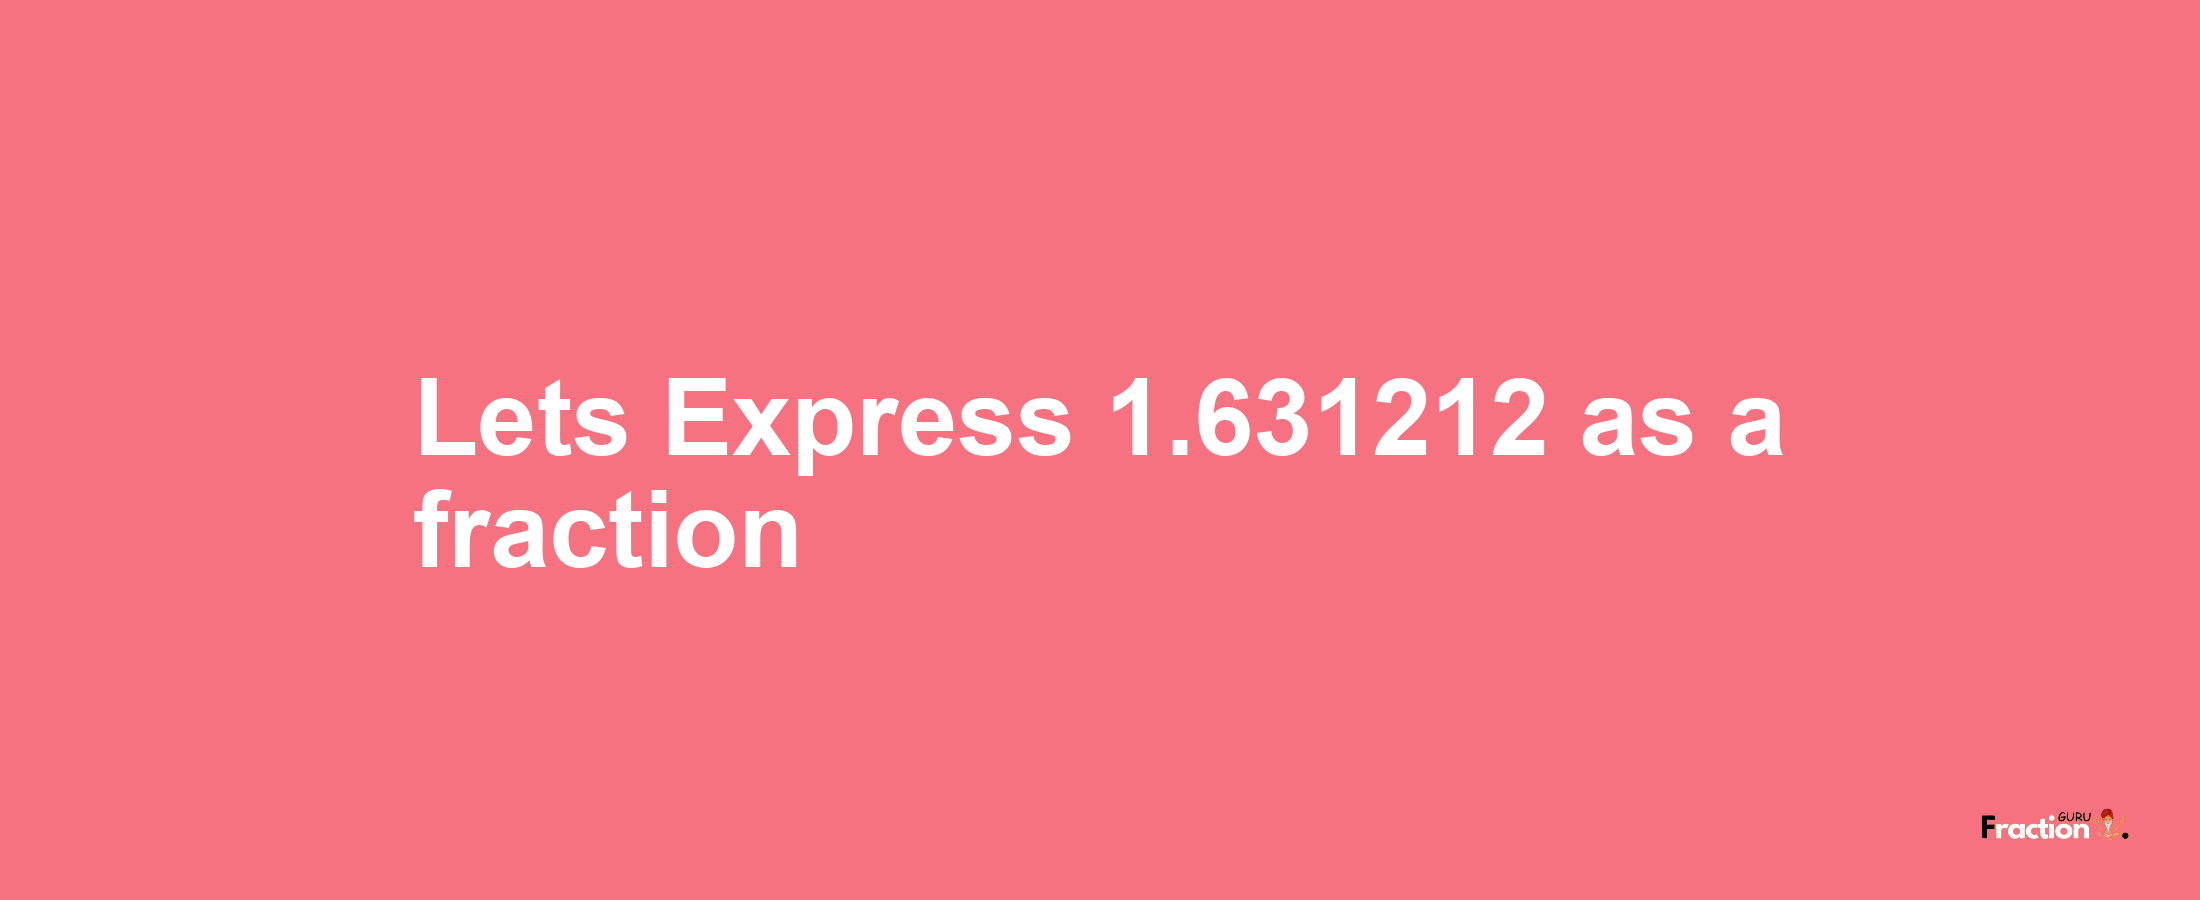 Lets Express 1.631212 as afraction